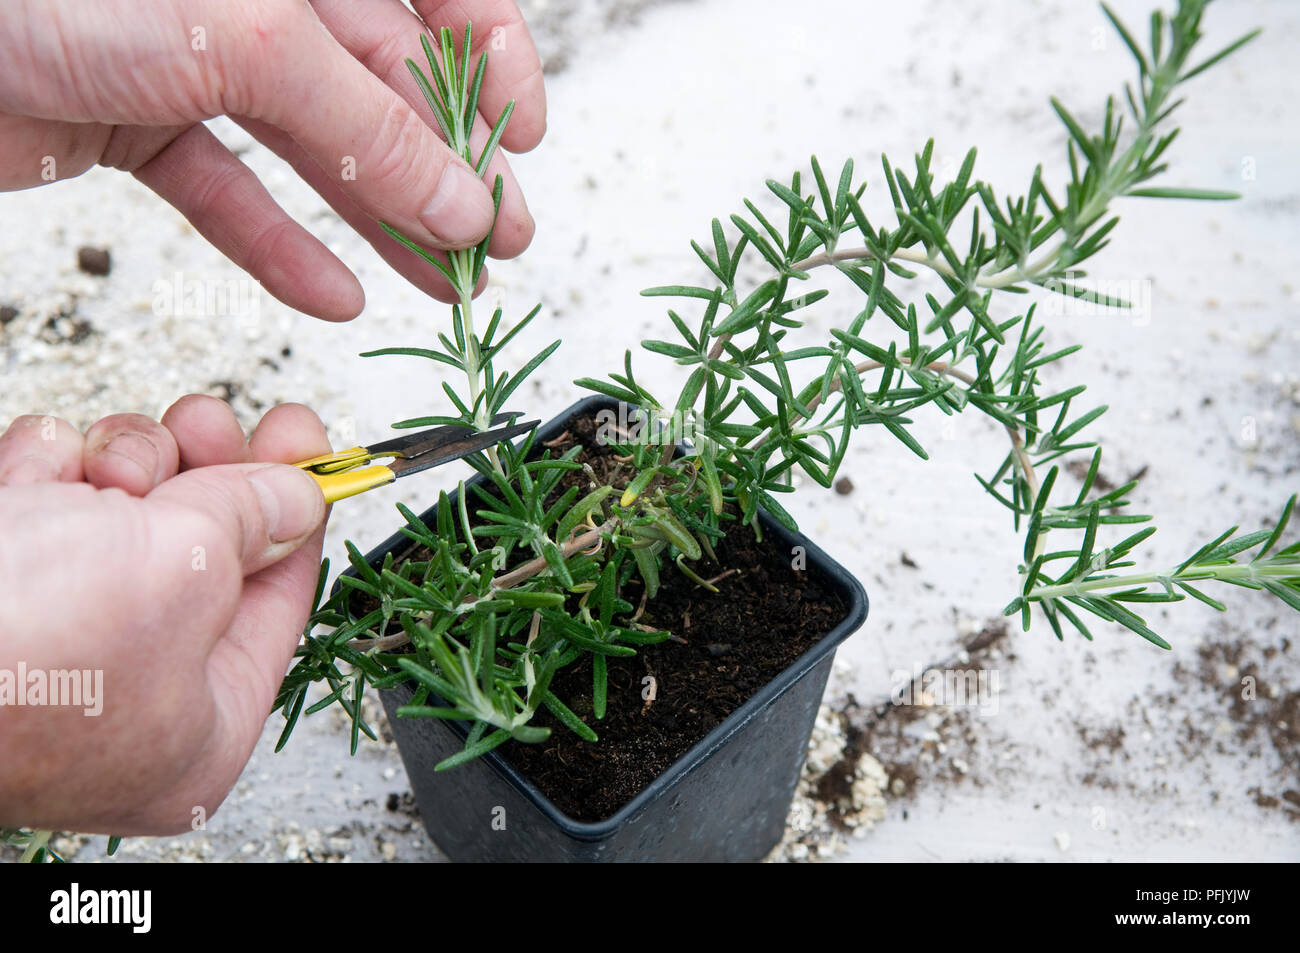 Hands clipping cutting off from rosemary plant, close-up Stock Photo